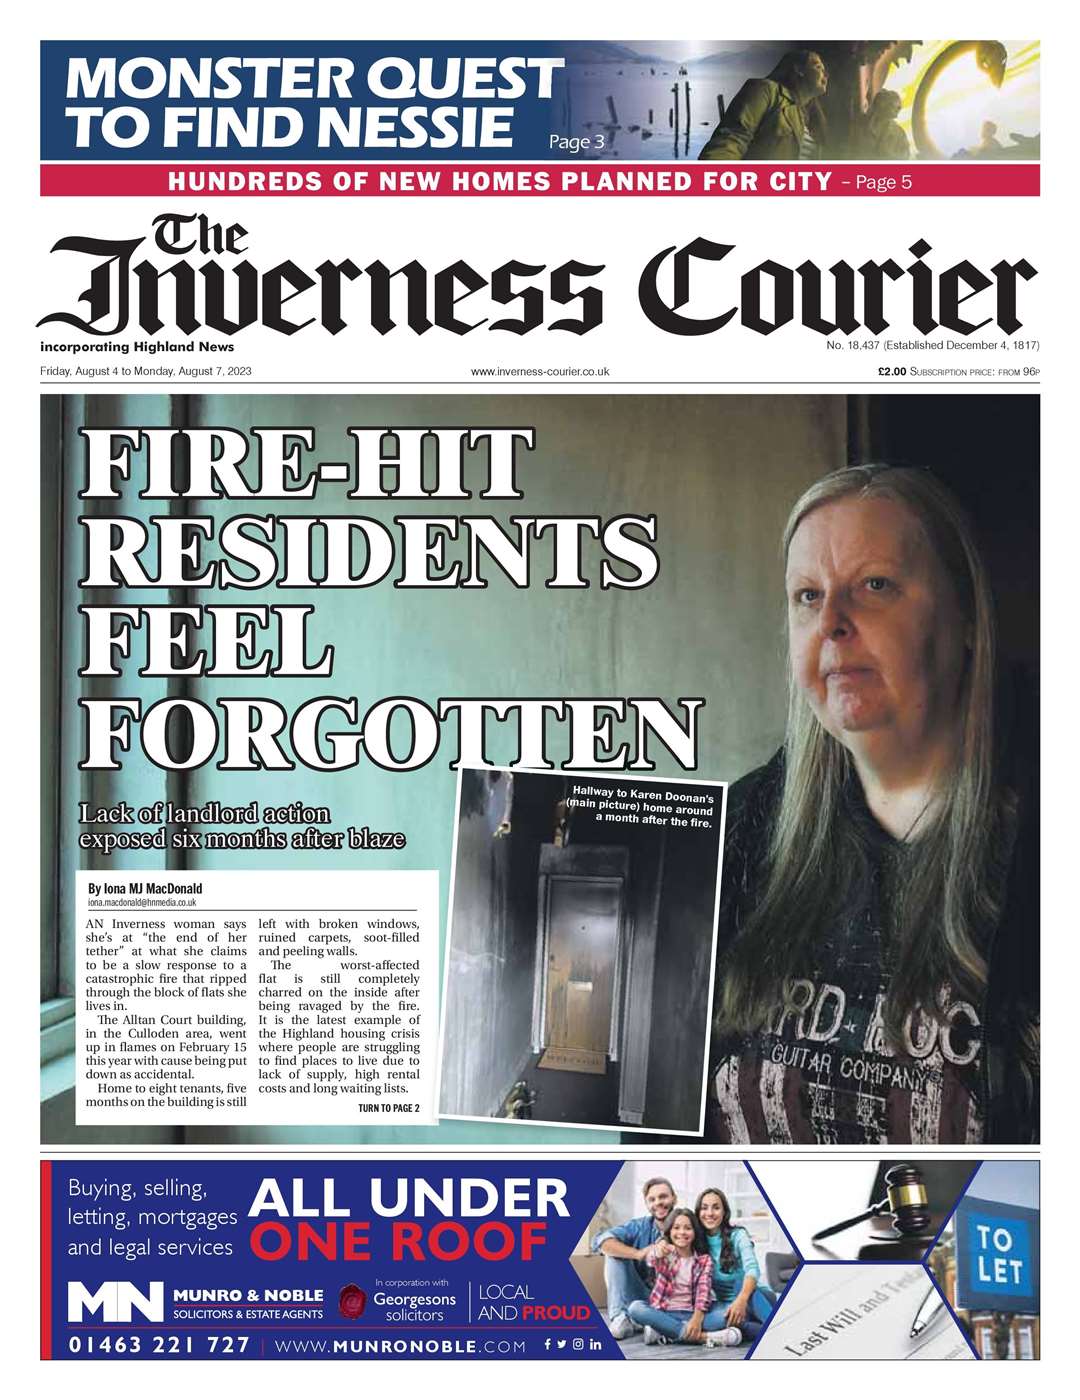 The Inverness Courier, August 4, front page.